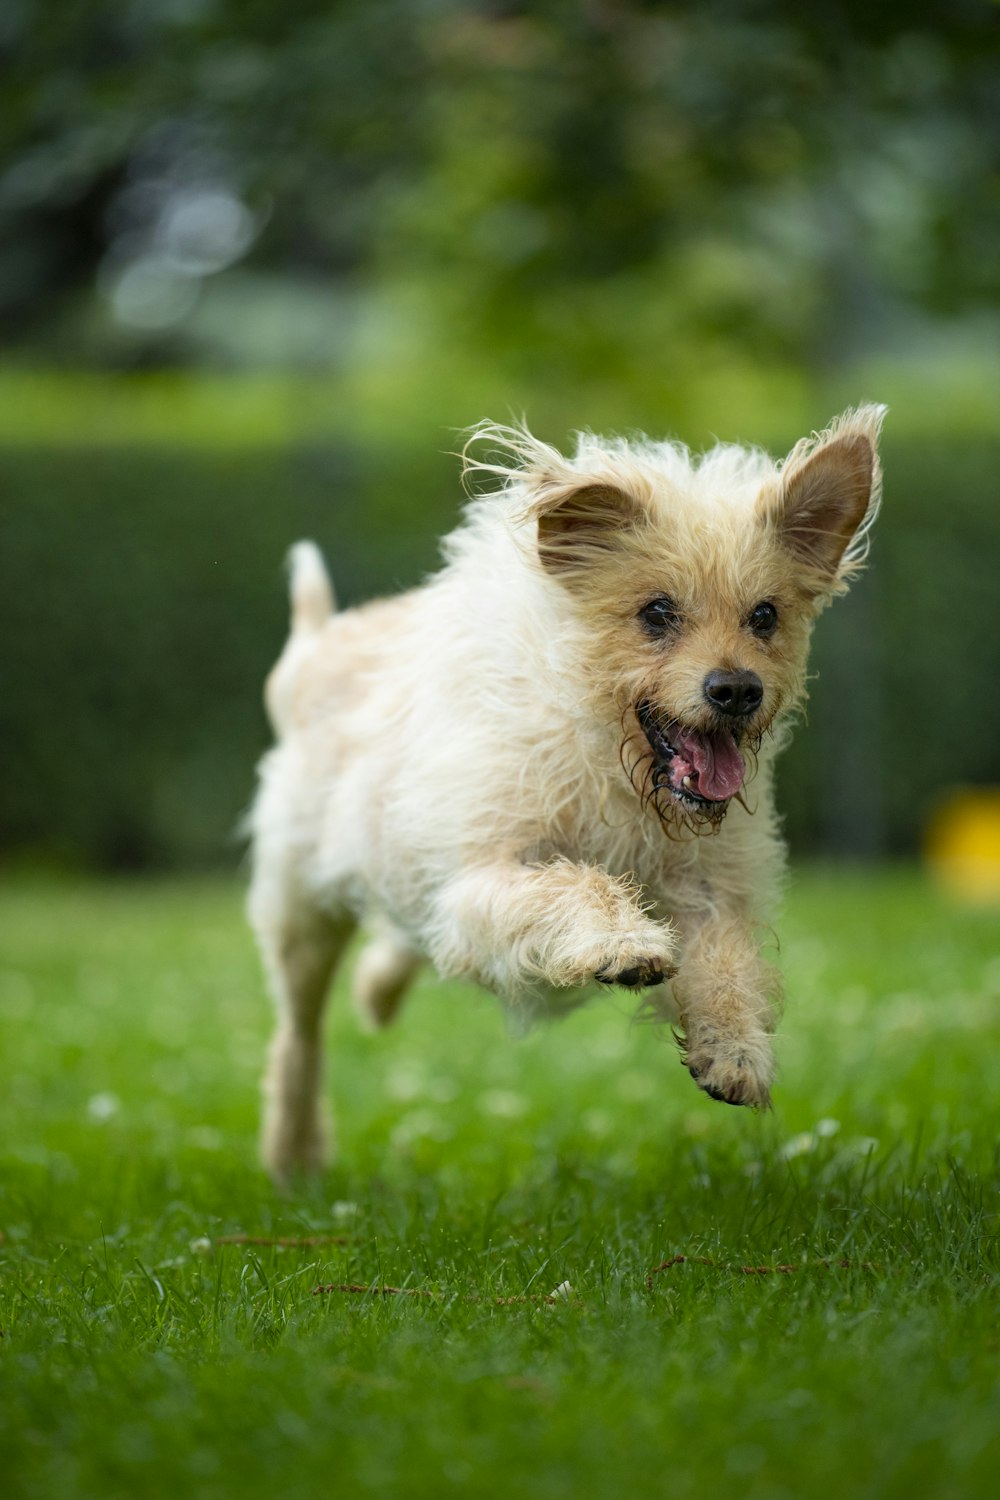 white and brown long coated small dog running on green grass field during daytime